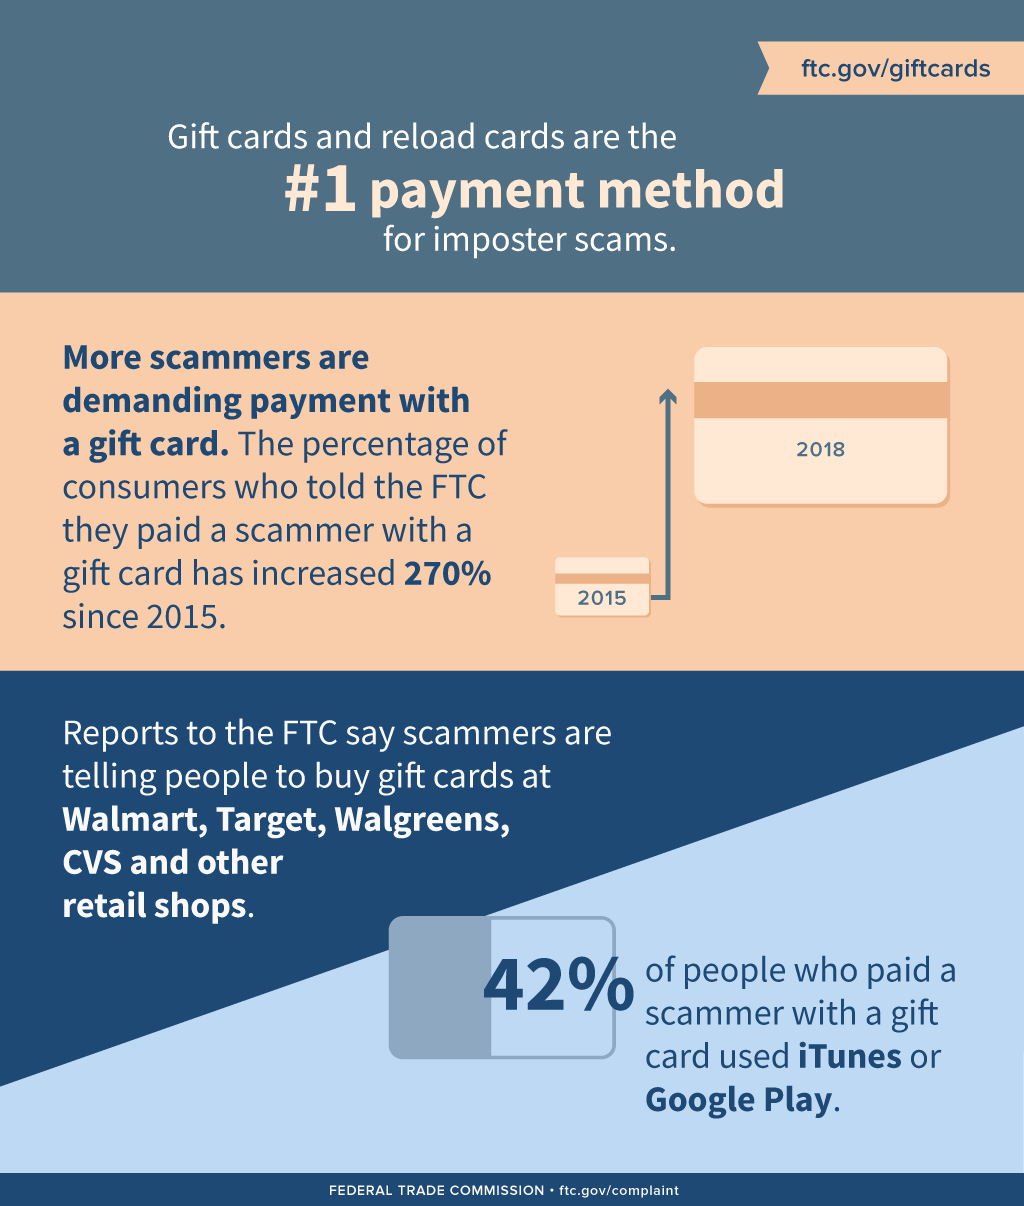 Avoid scams, don’t use gift cards to pay bills